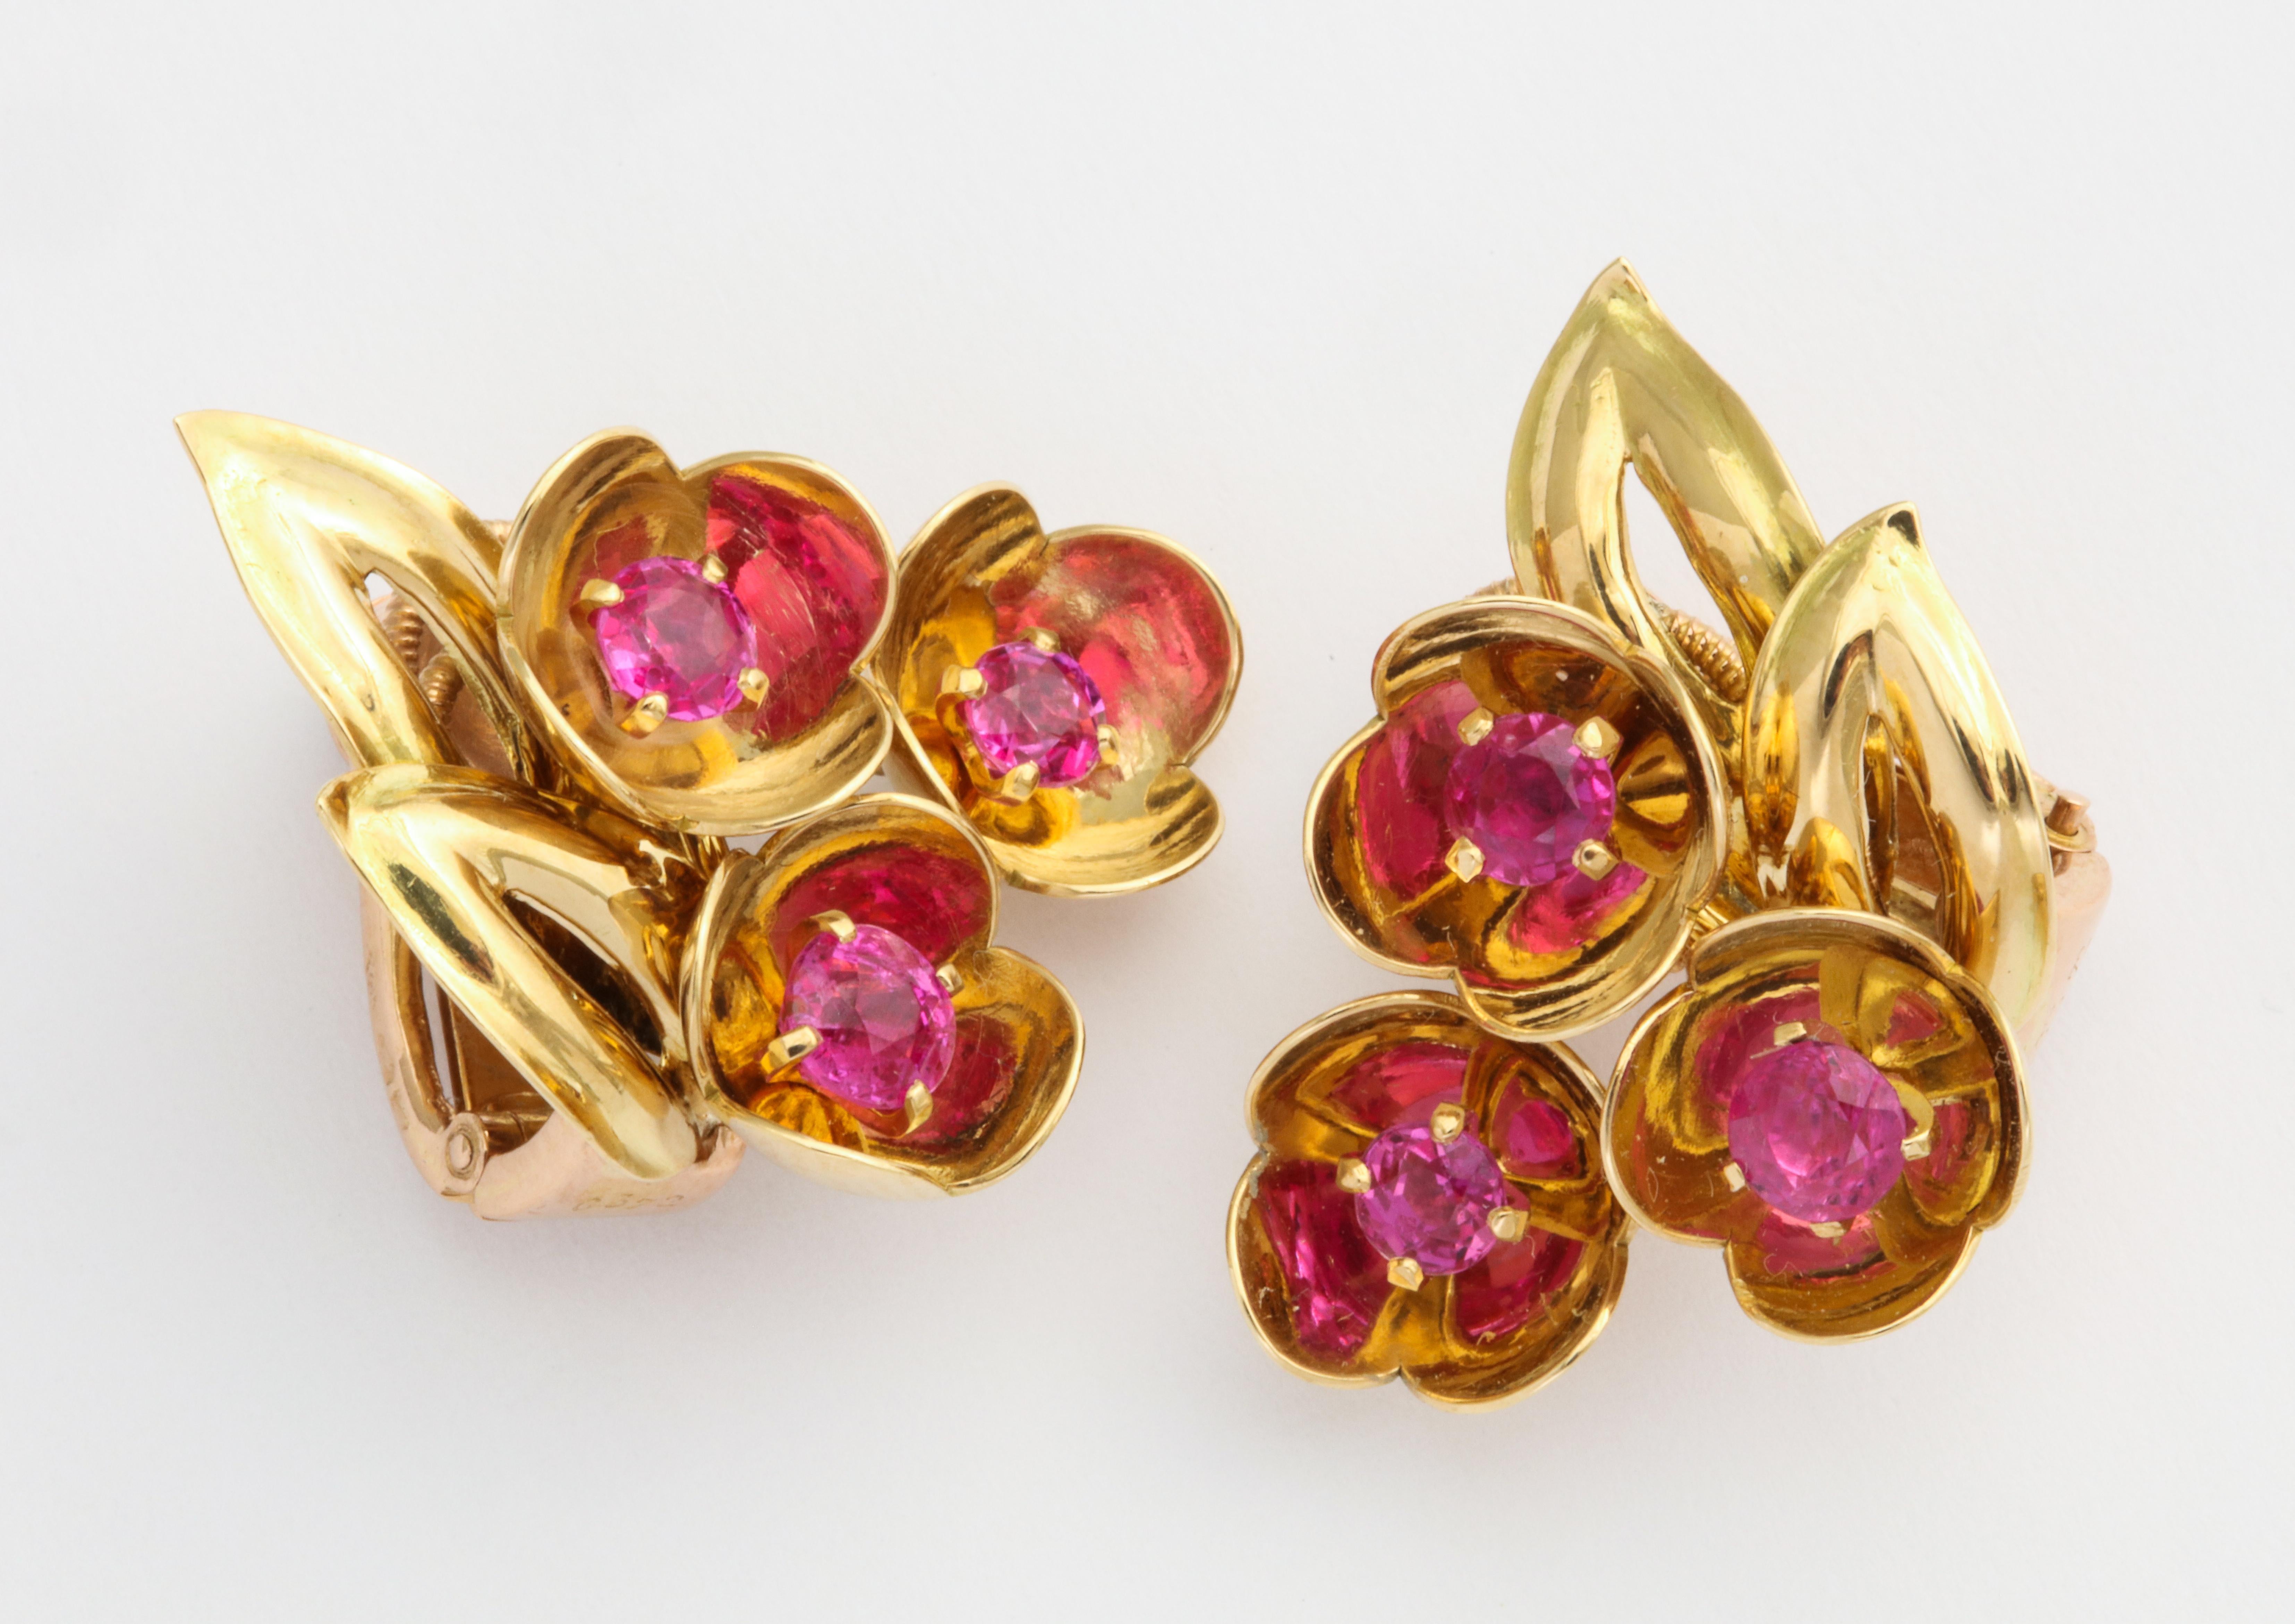 Stunningly simple, this retro era Cartier ear clip will be your go-to daytime earring for all seasons.  The rubies are a vibrant hot pinkish red faceted stone set in a gold mirror effect cup. You will live in these!